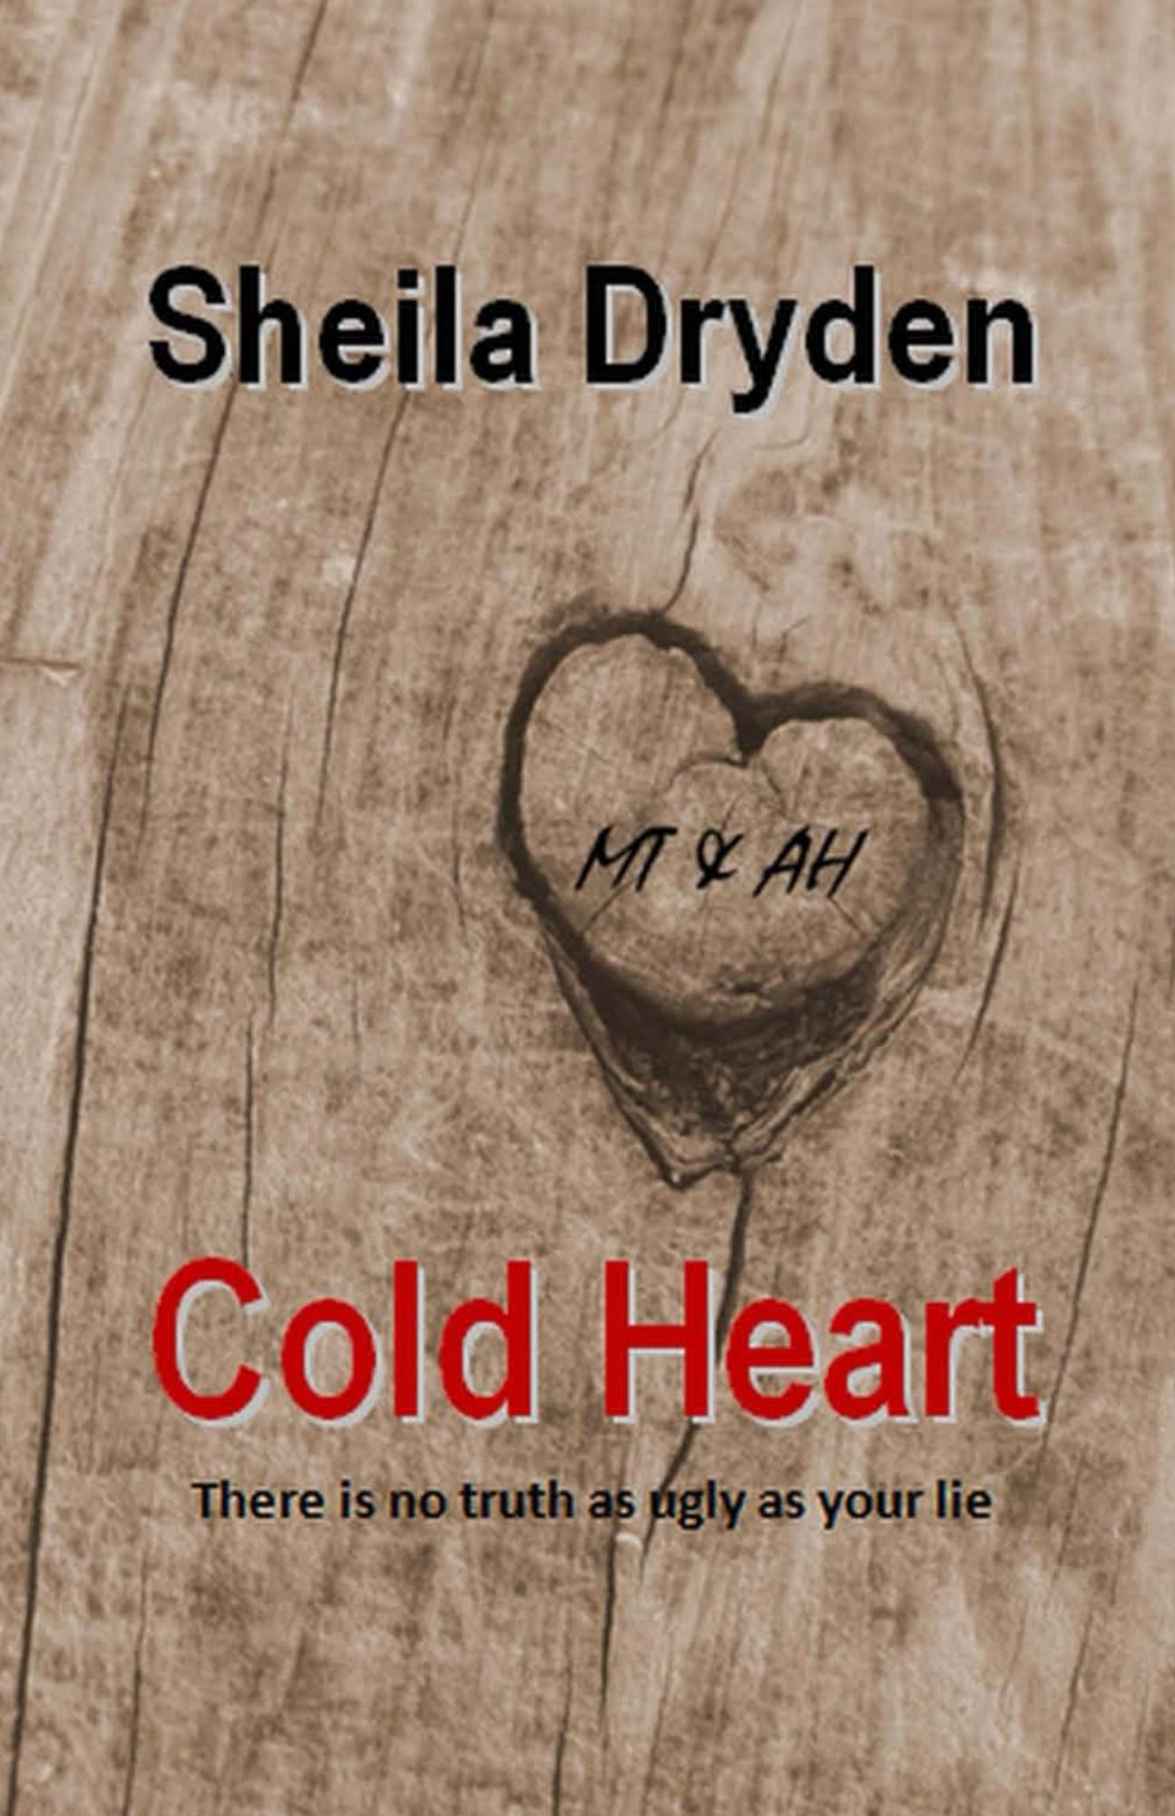 Cold Heart by Sheila Dryden